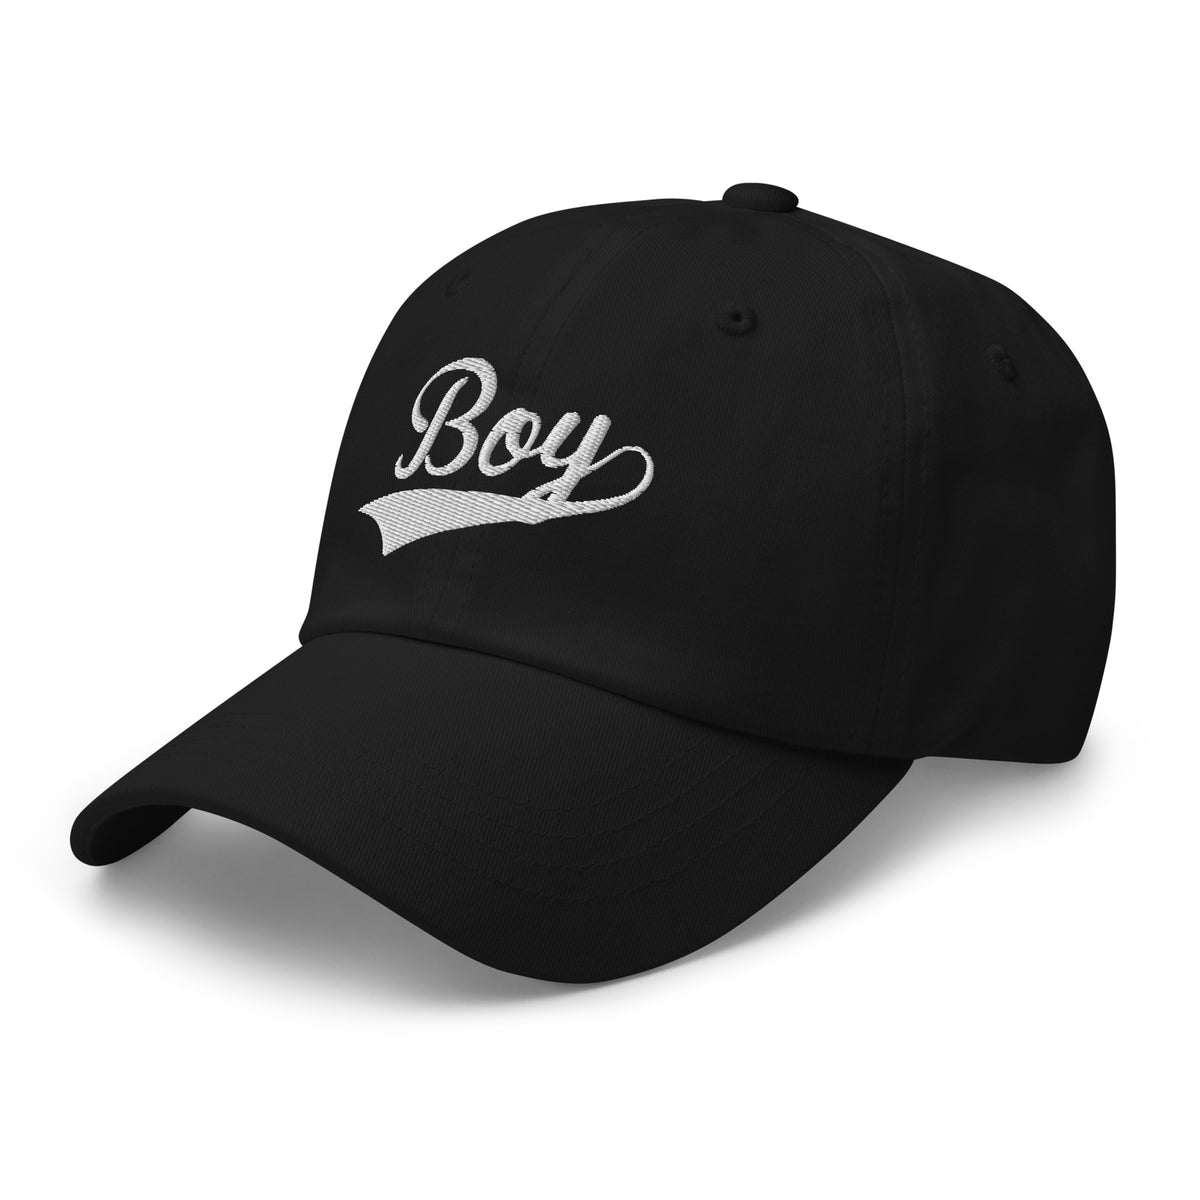 Boy Embroidered Cap - Ball Cap - Twisted Jezebel